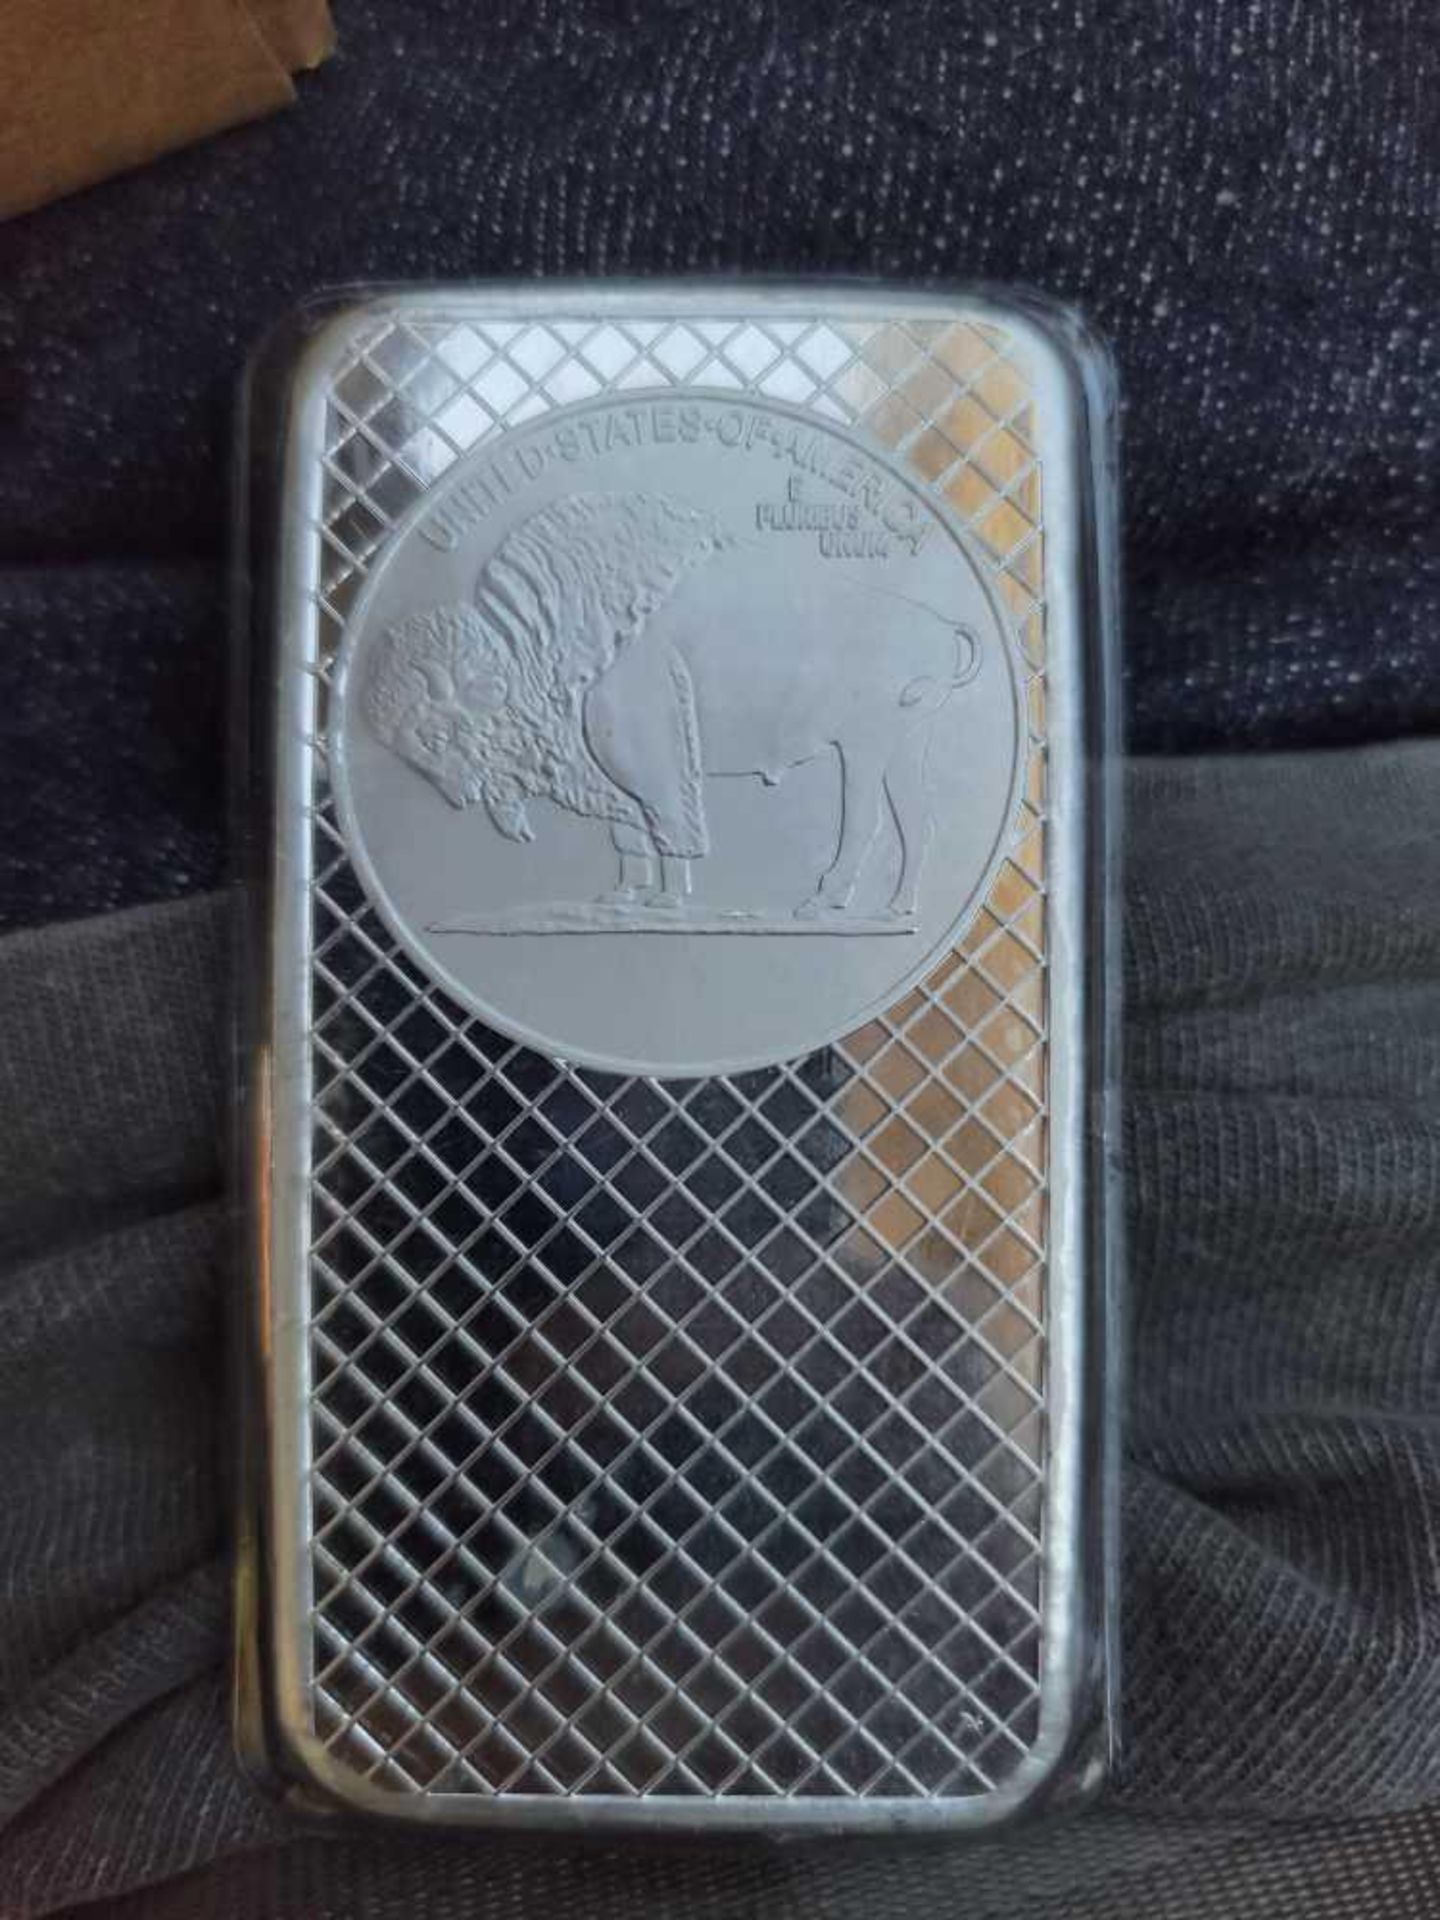 10 oz Silver - Image 2 of 2